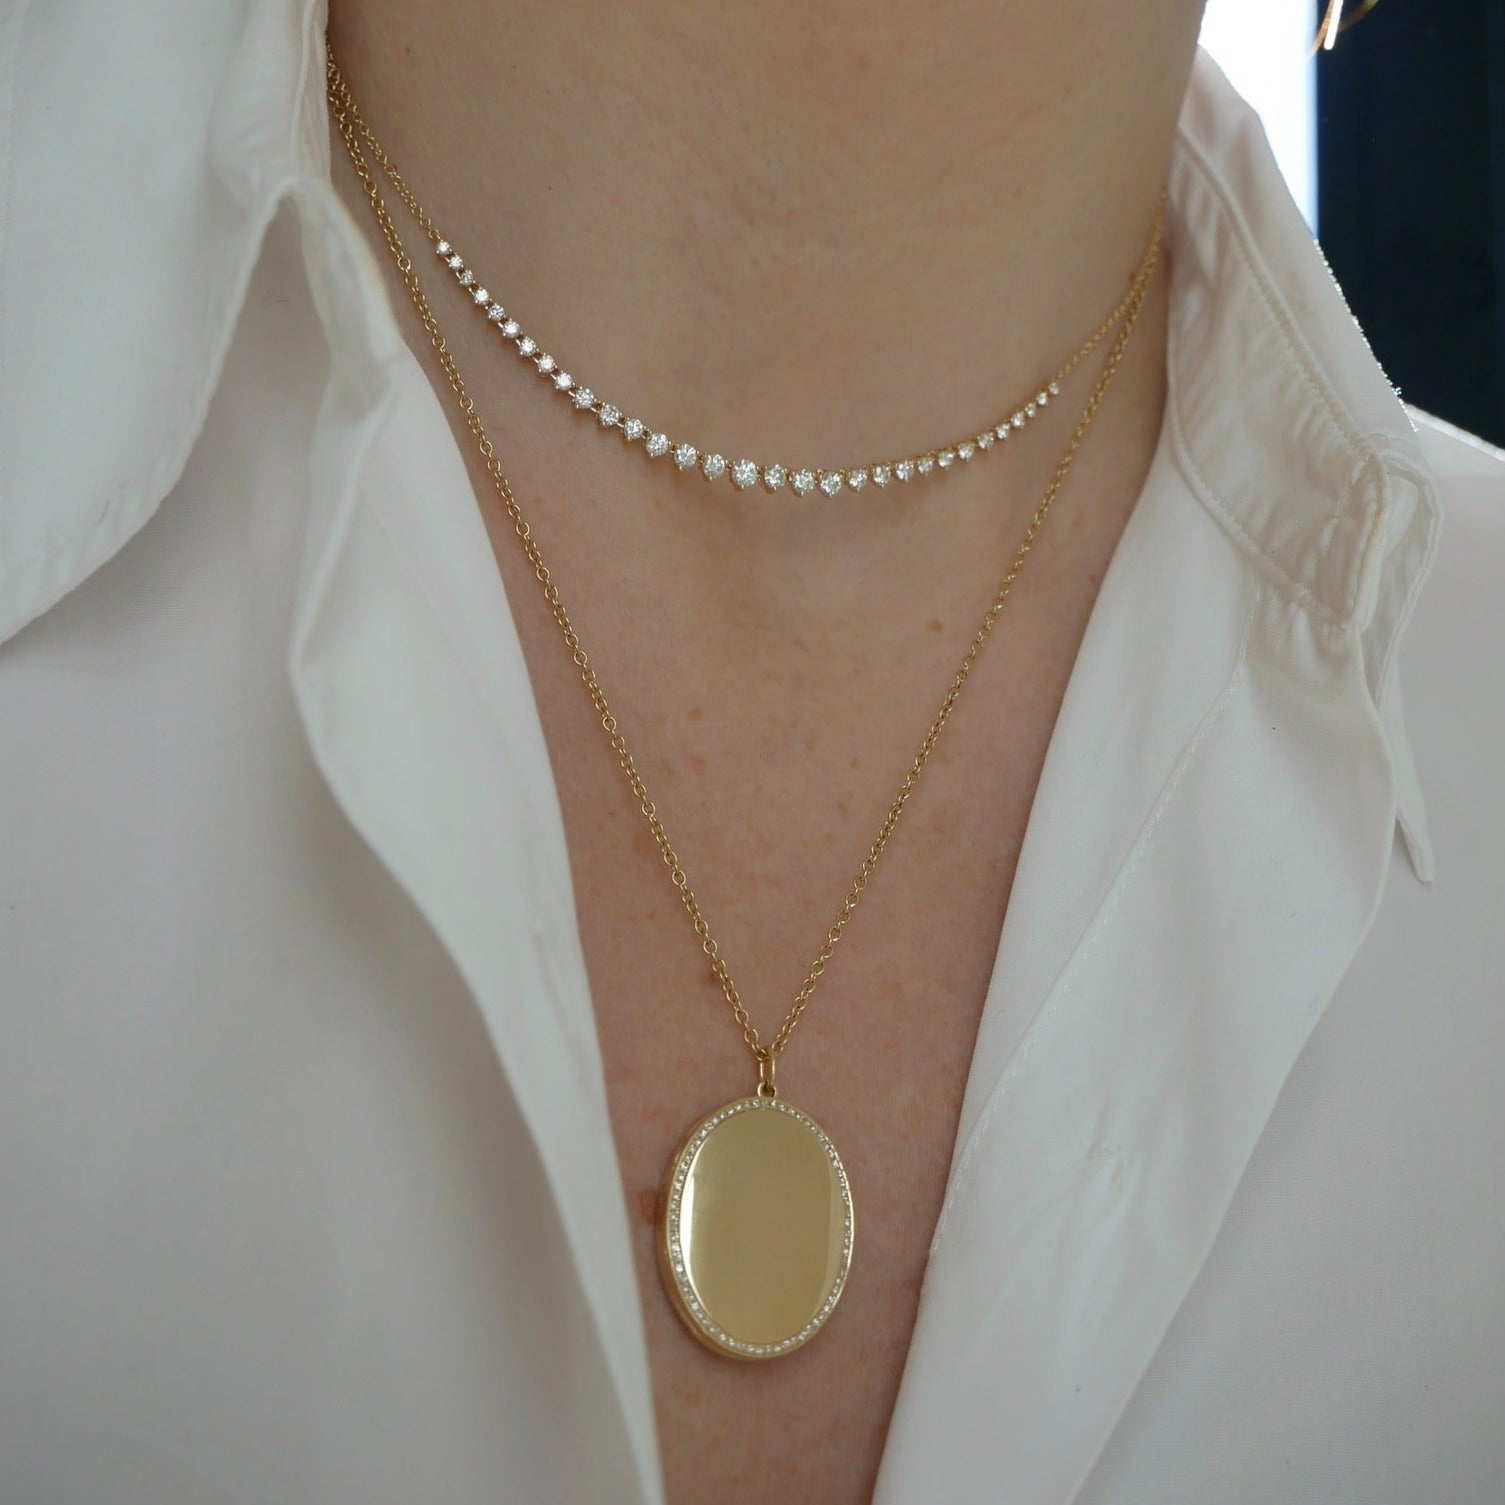 Gold and Diamond Oval Locket Necklace styled on neck of model with diamond necklace